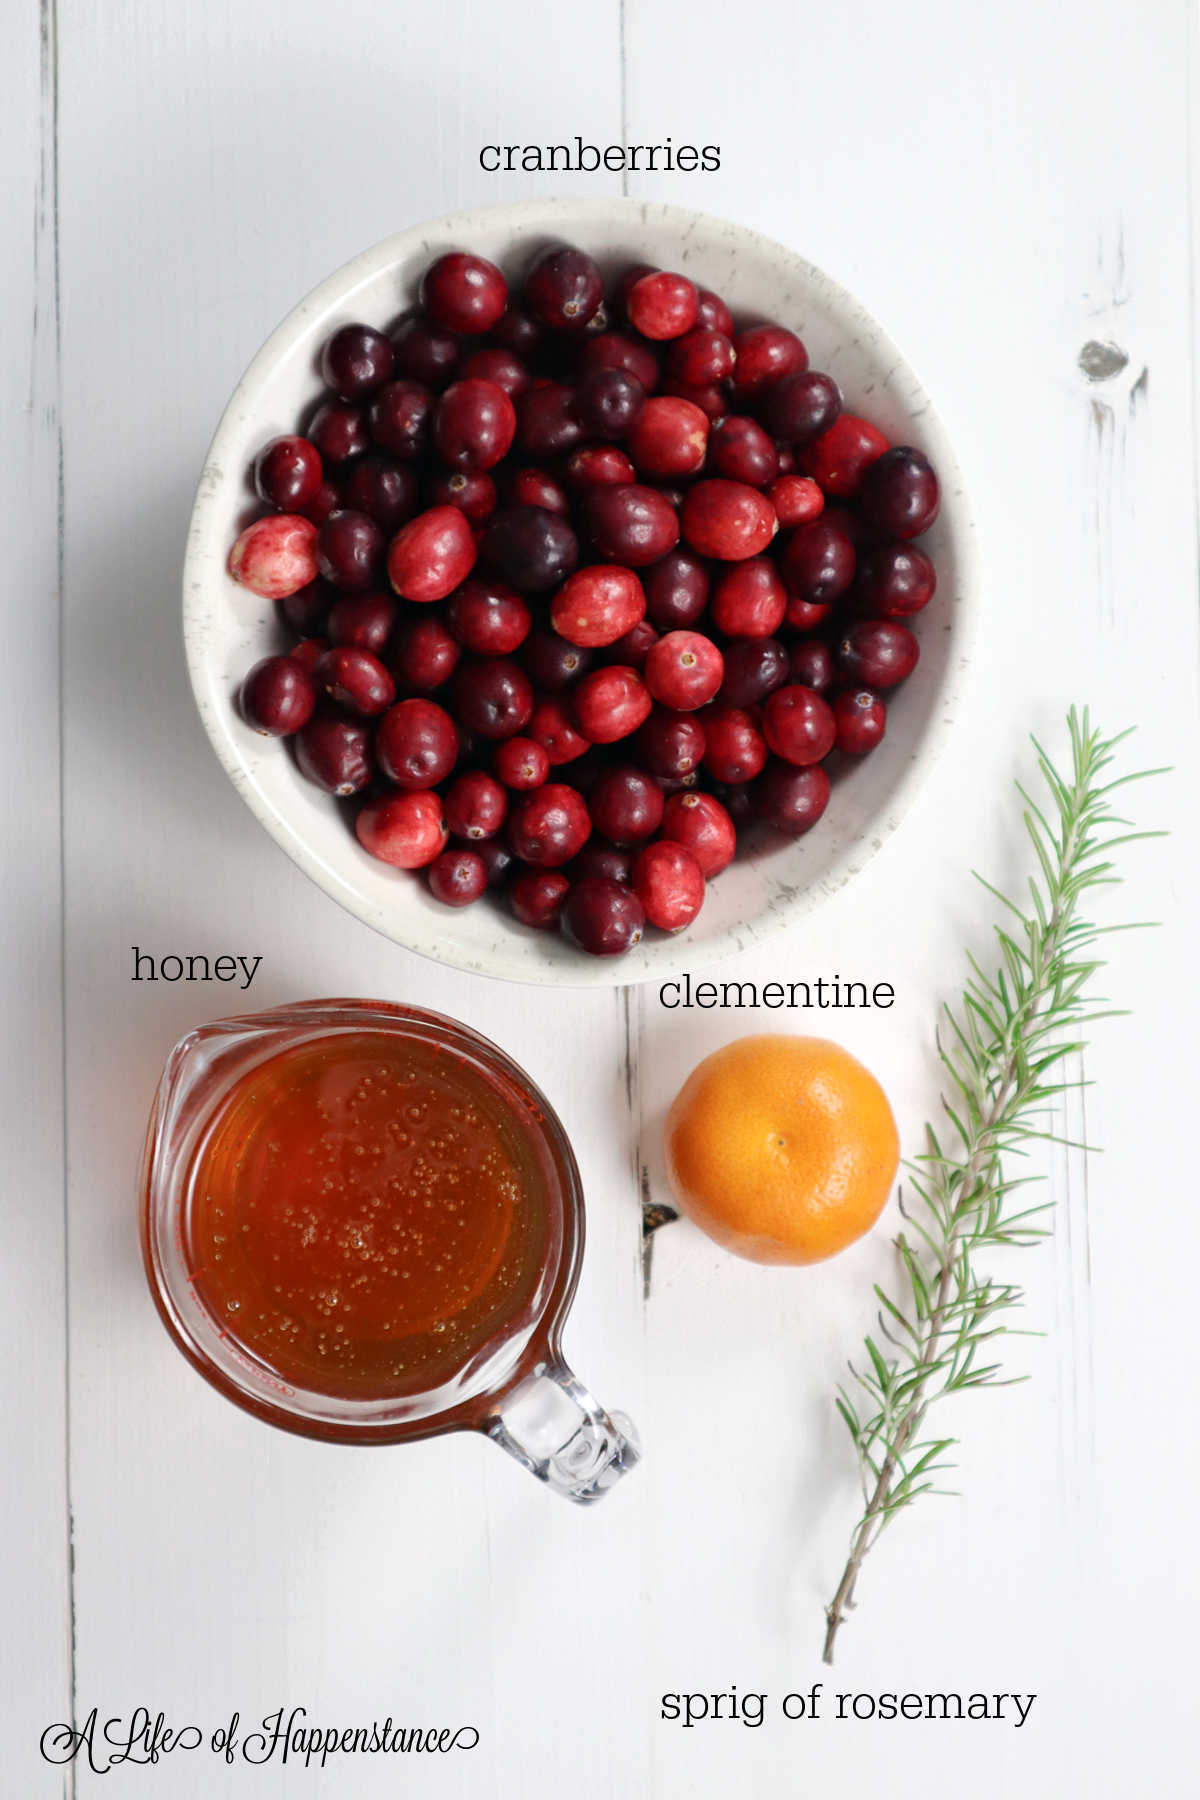 The ingredients for the sauce on a white table ;cranberries, honey, clementine, sprig of rosemary.